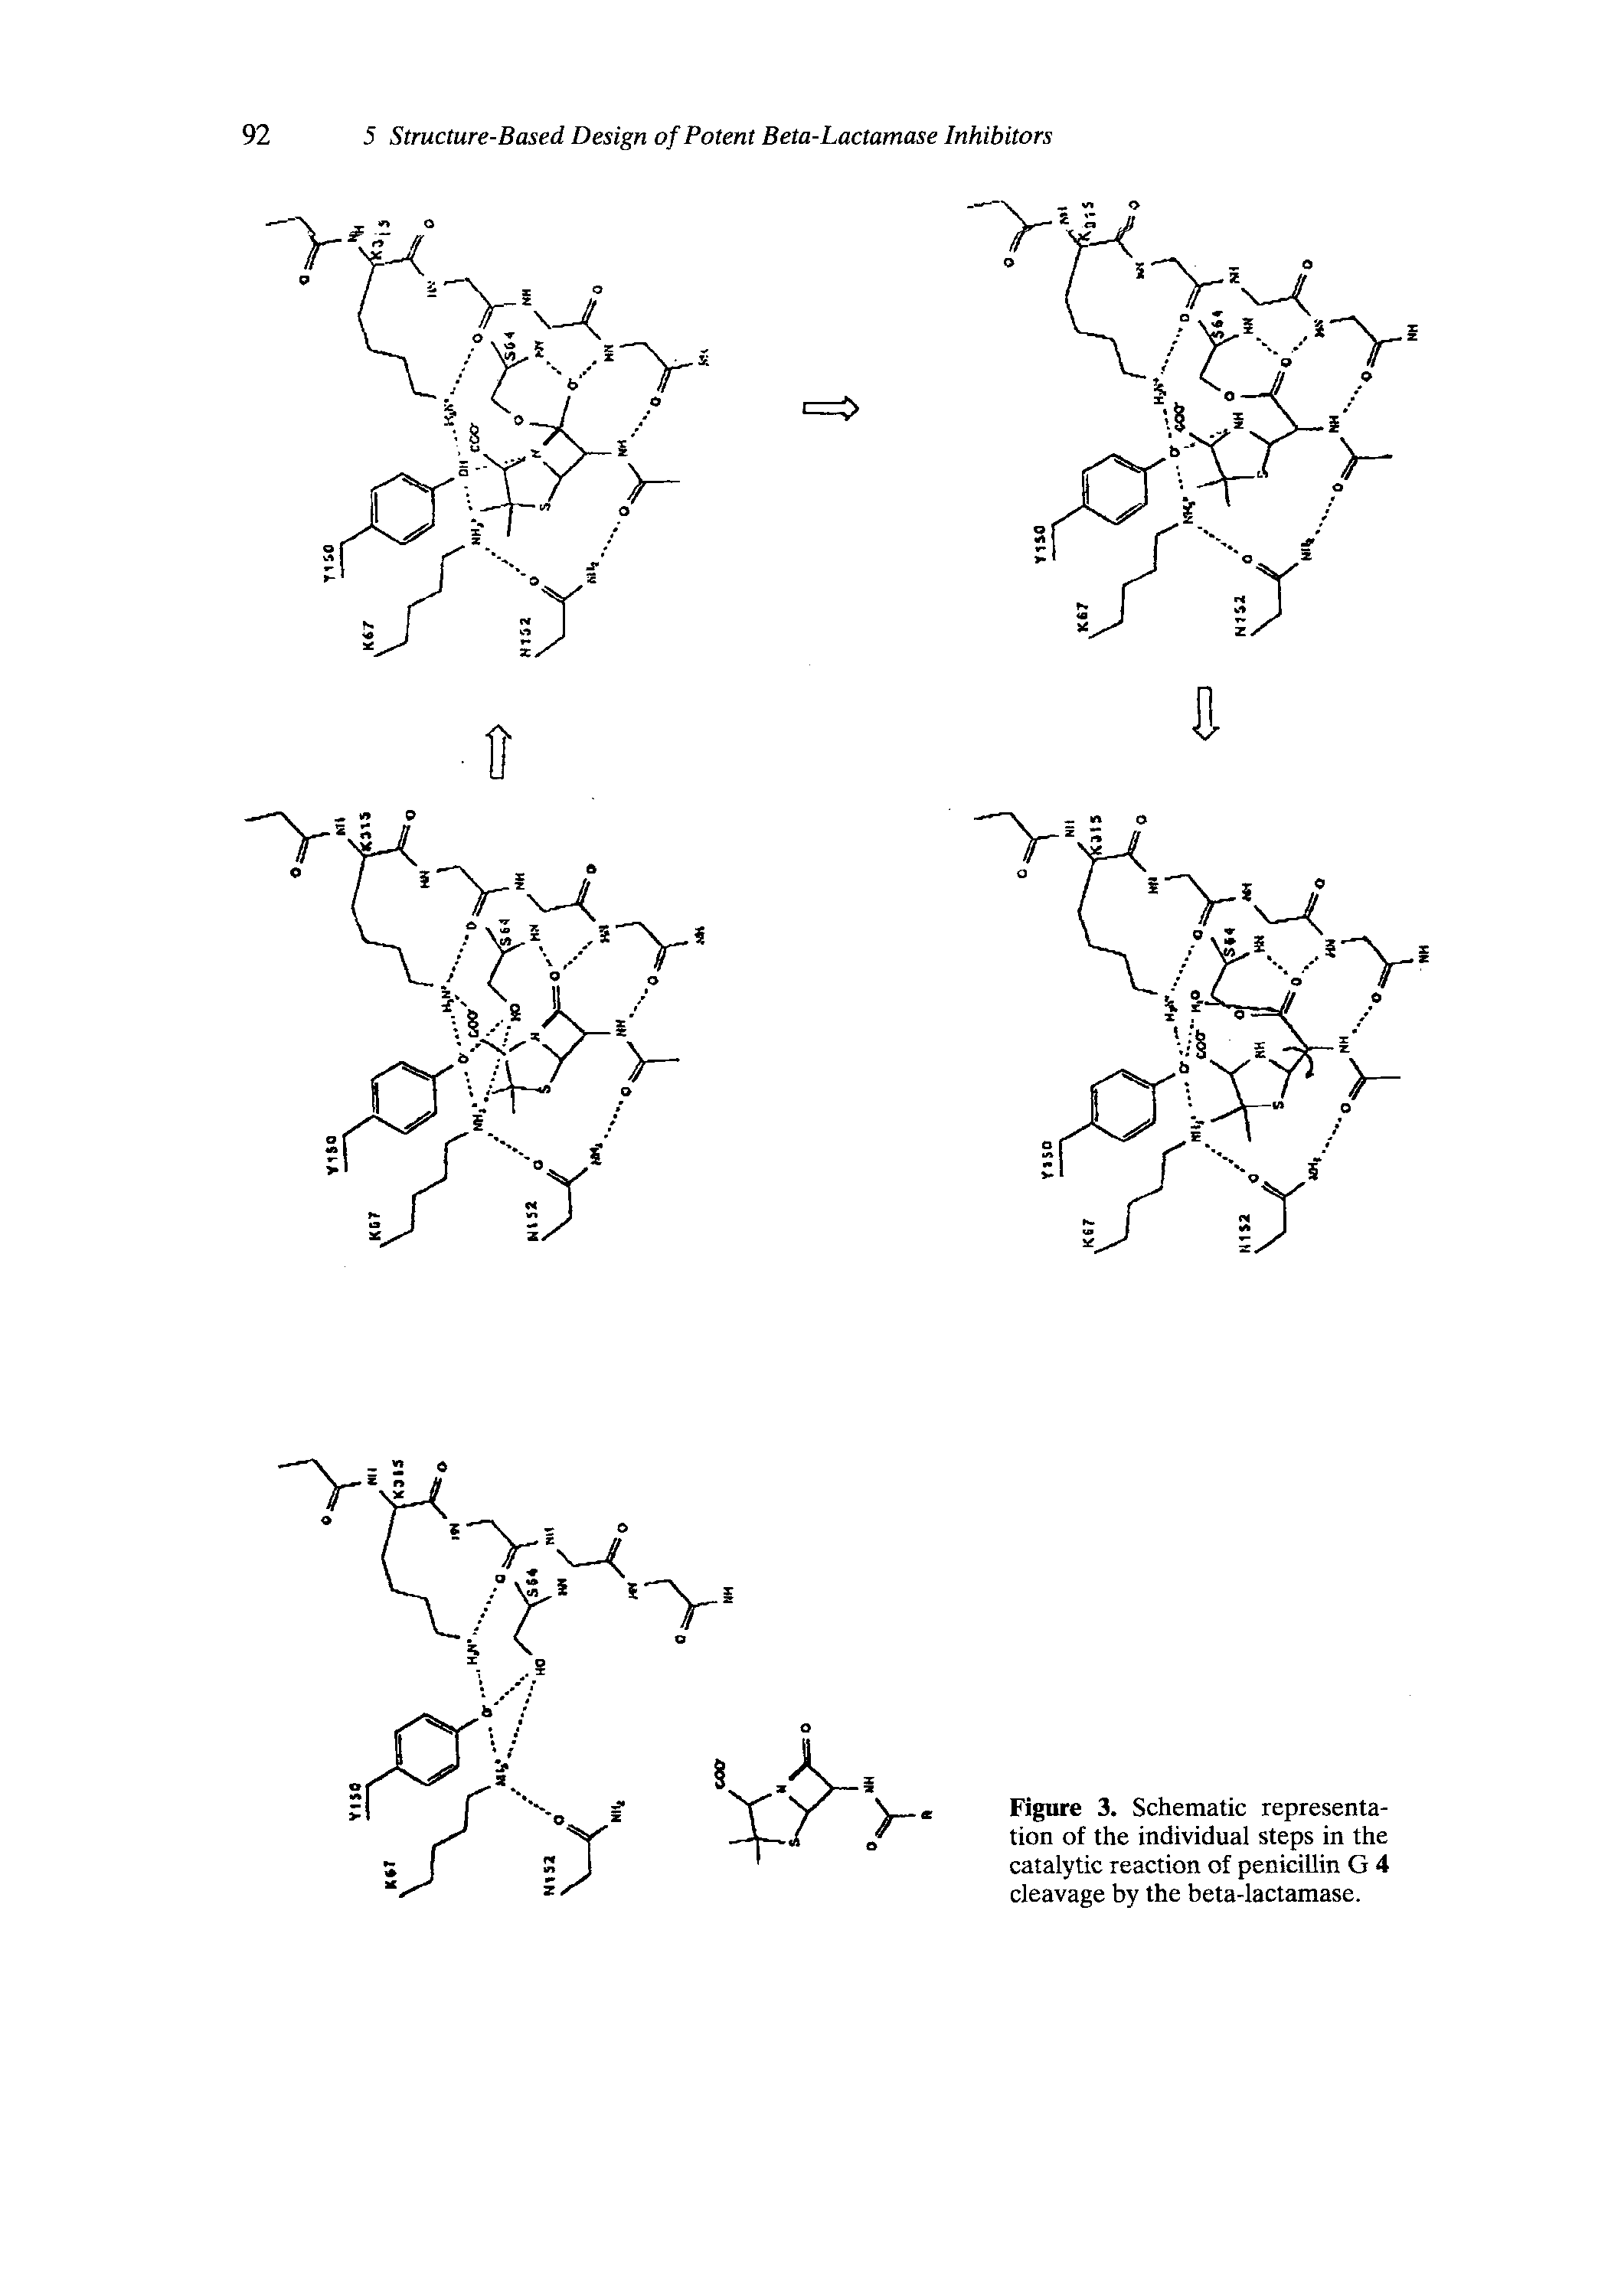 Figure 3. Schematic representation of the individual steps in the catalytic reaction of penicillin G 4 cleavage by the beta-lactamase.